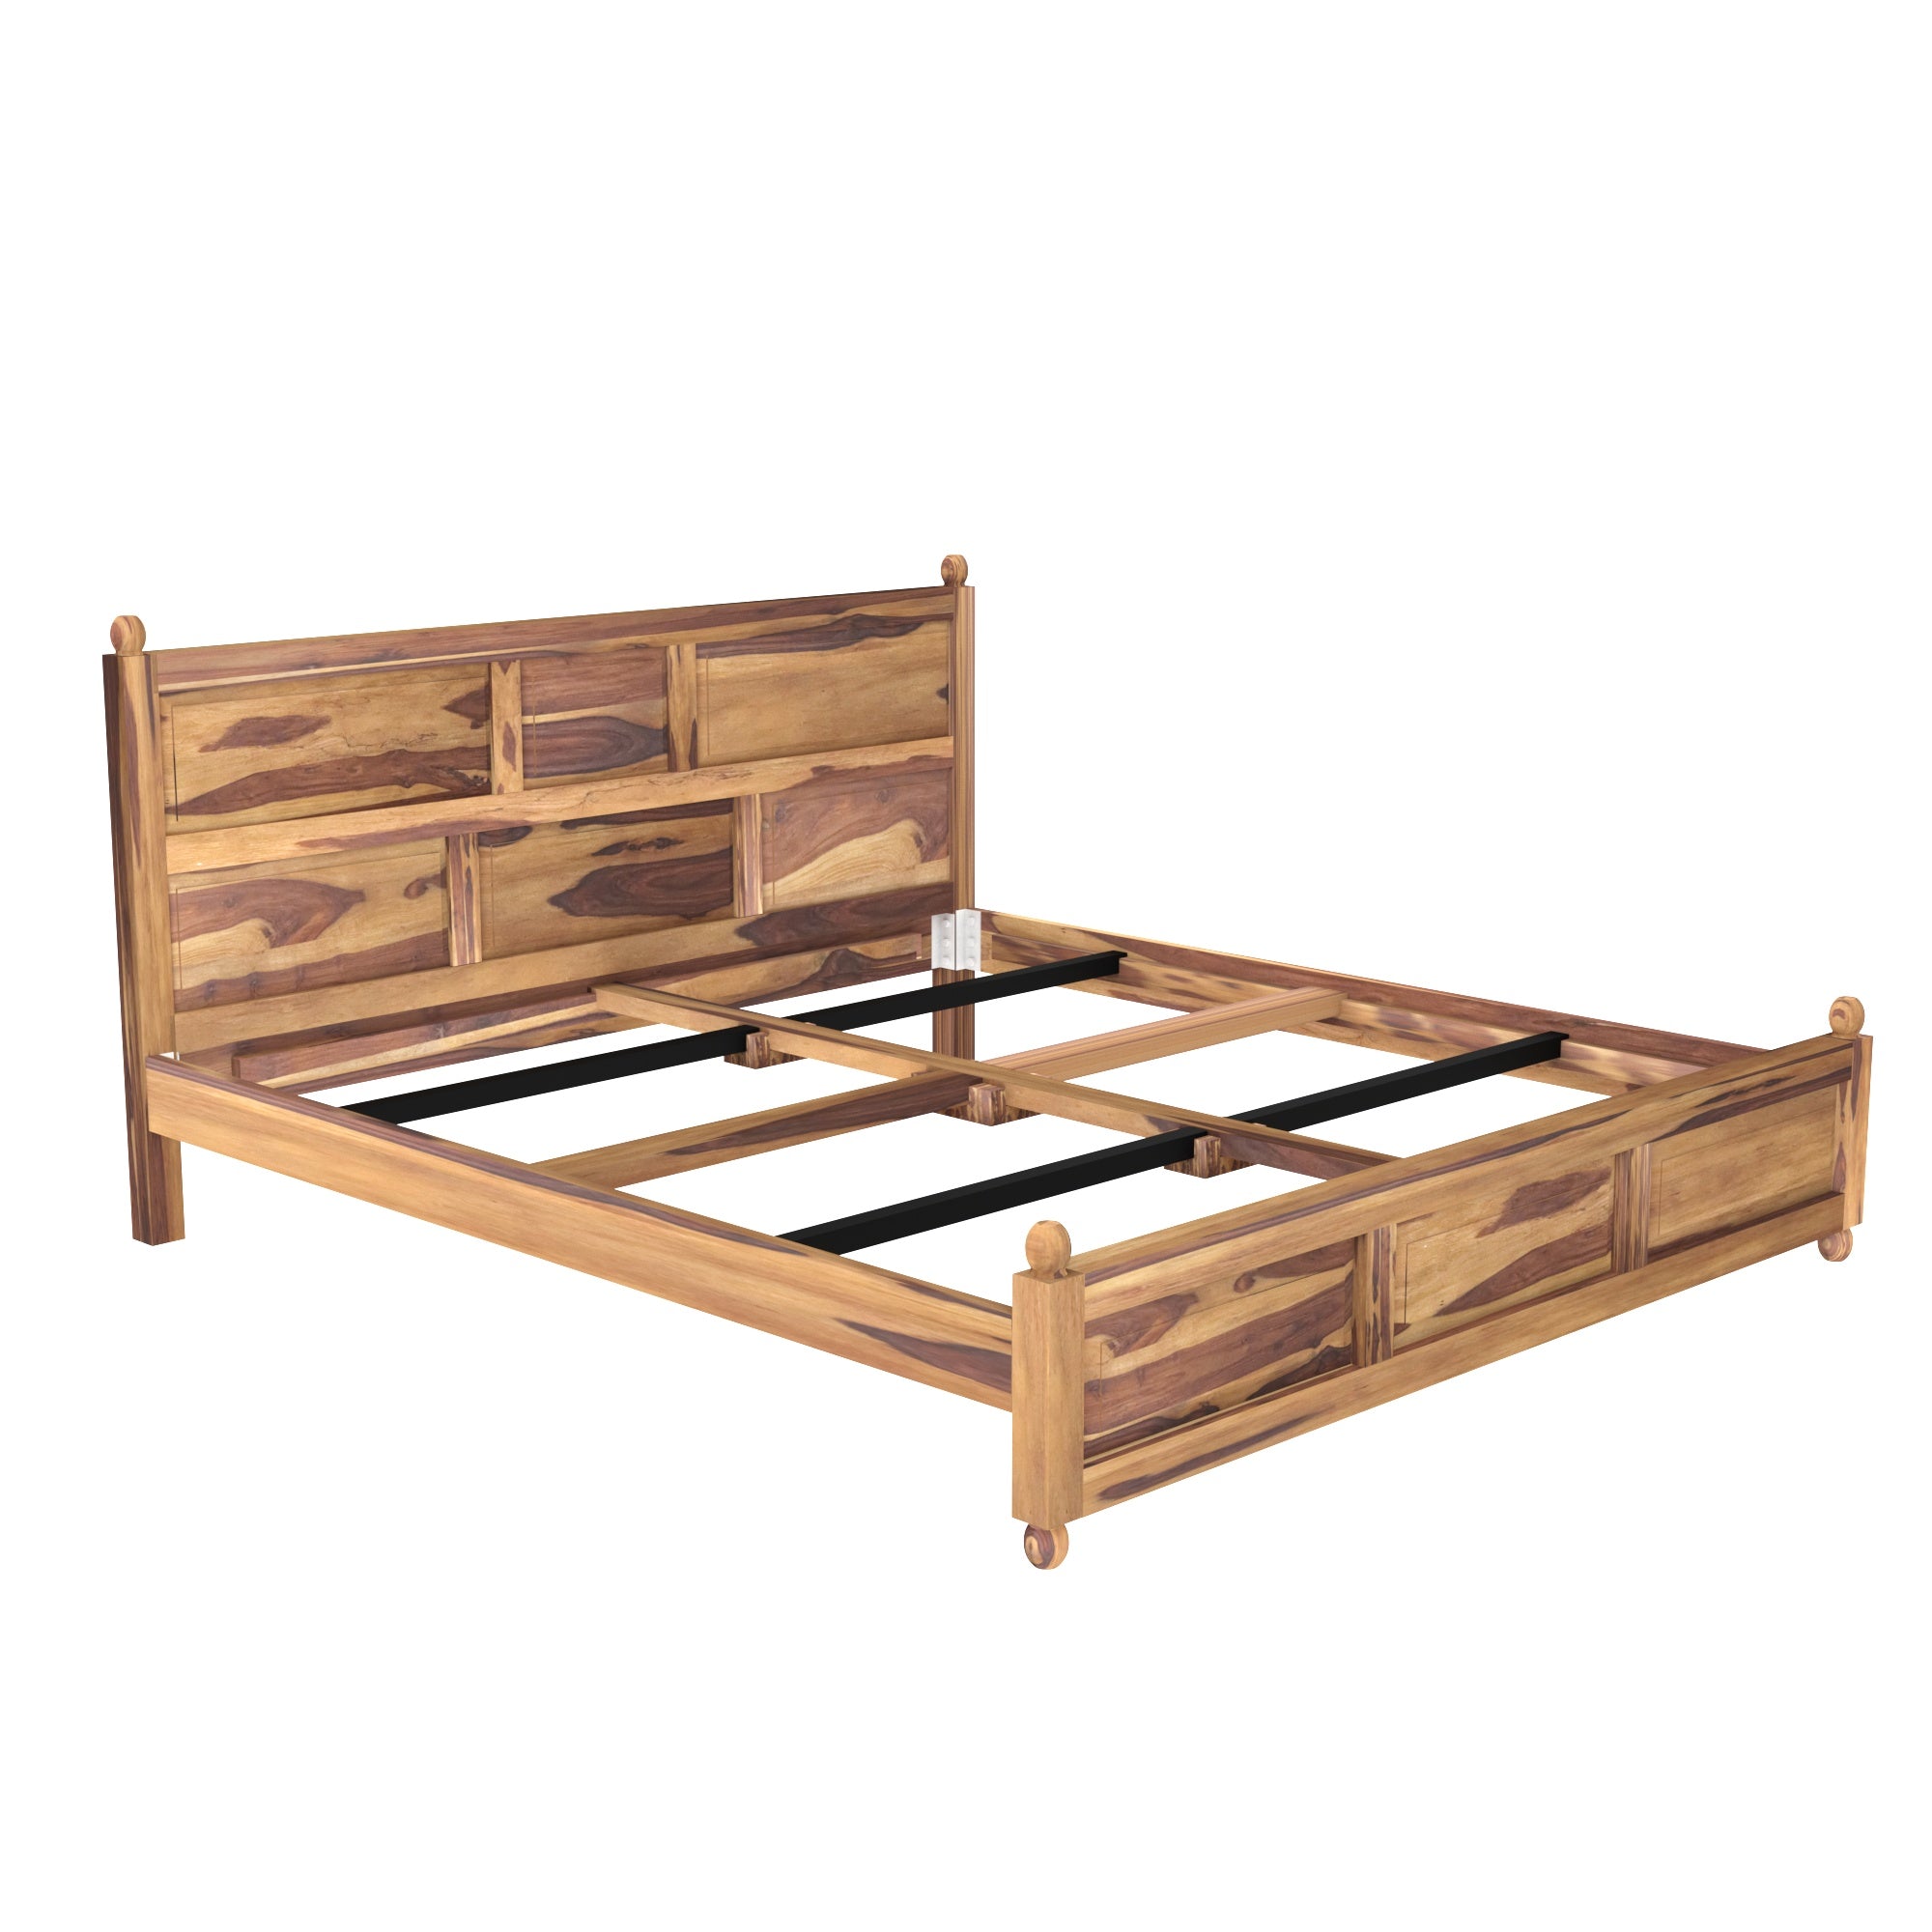 Wooden Plain Classical Bed Sheesham Wood Bed